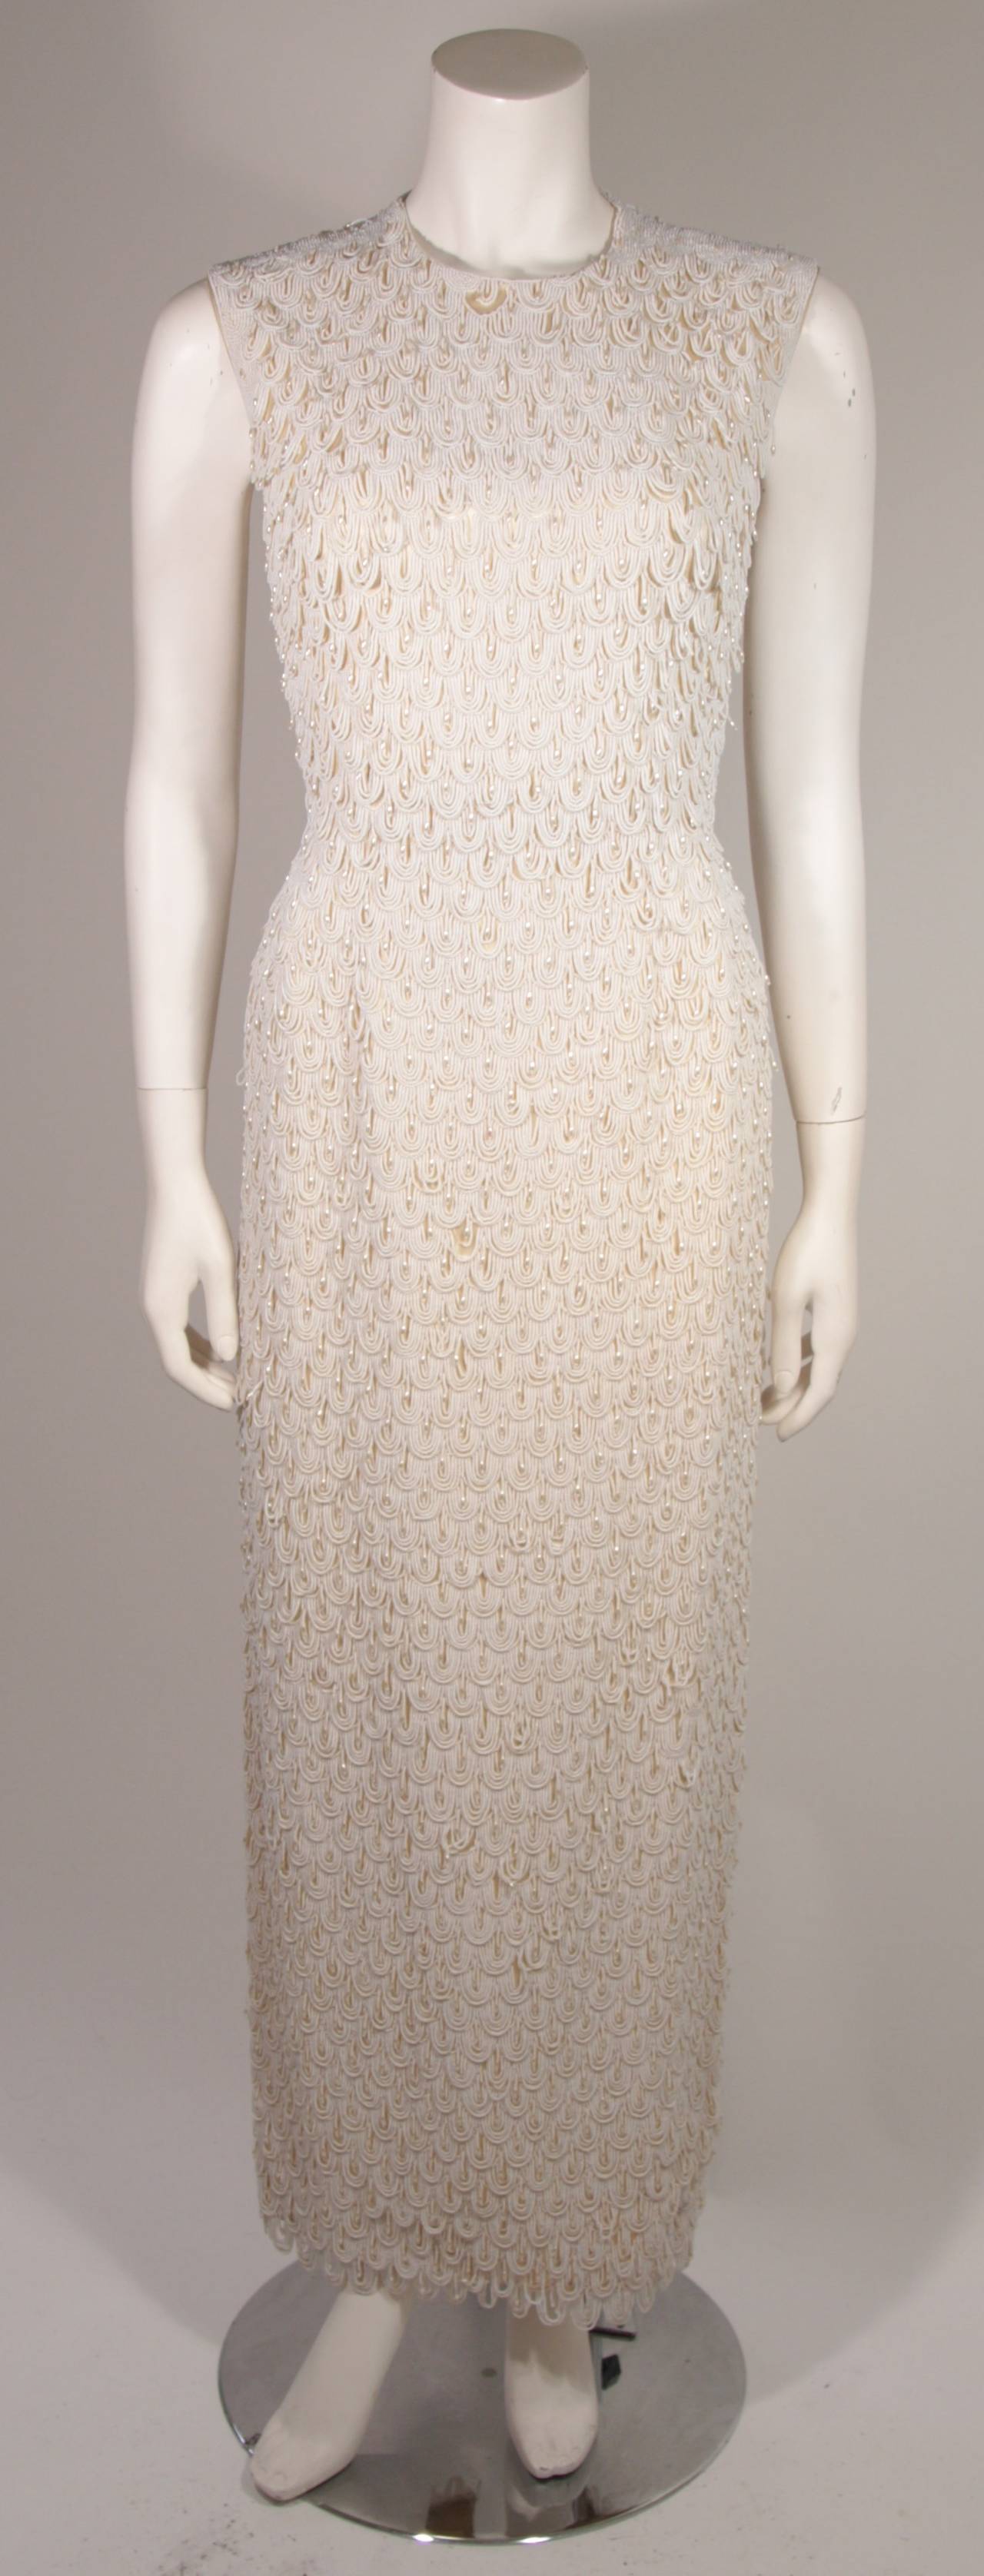 This is a stunning Ivory colored gown from the 1960's. The dress is fashioned with heavily beaded pearl like accents and adornments. There is a center back zipper for ease of access. Excellent vintage condition. Very substantial gown.

Measures